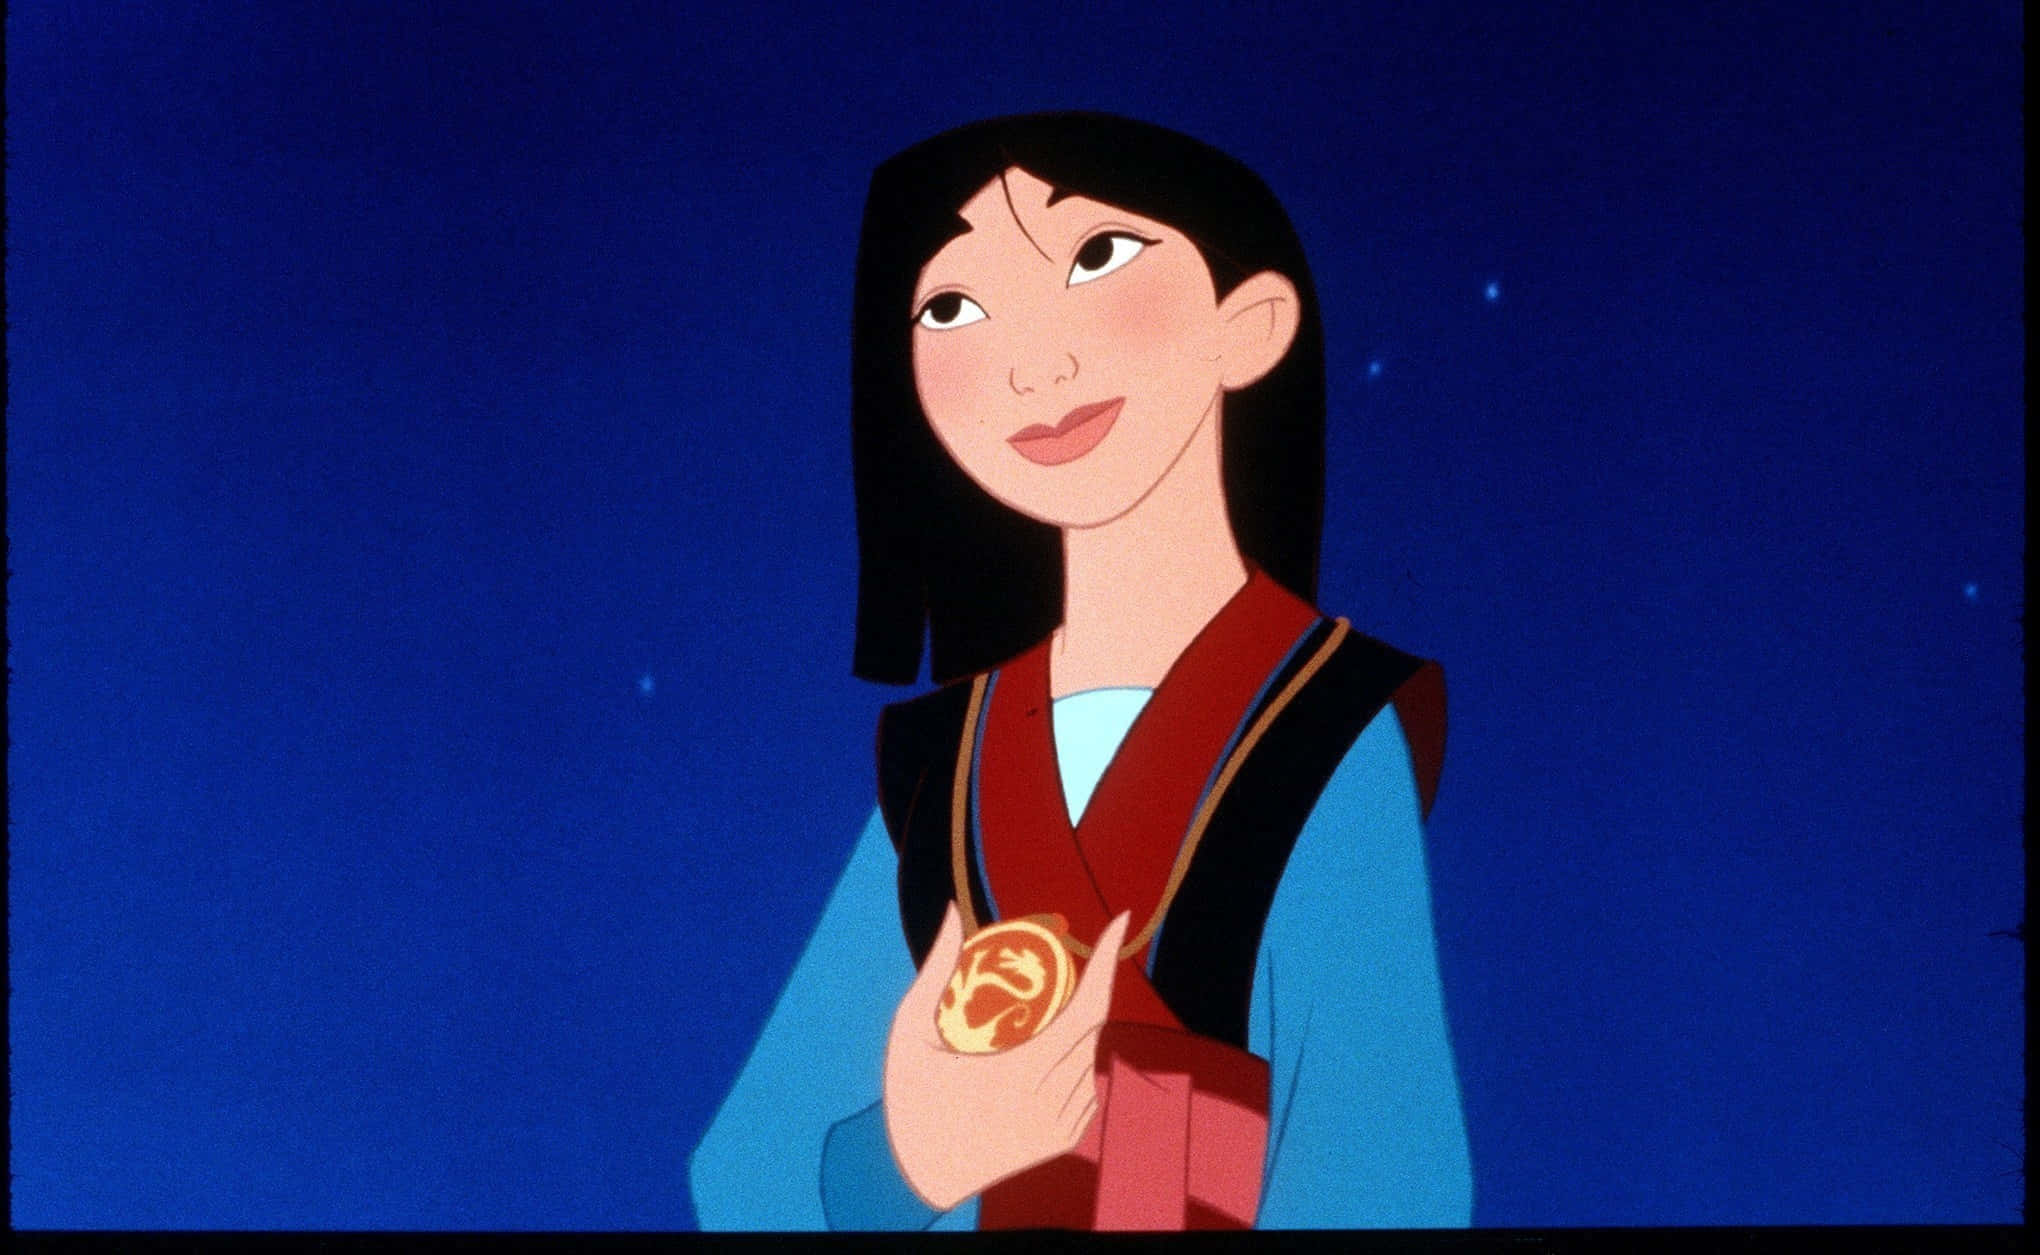 The determination and courage of Mulan.